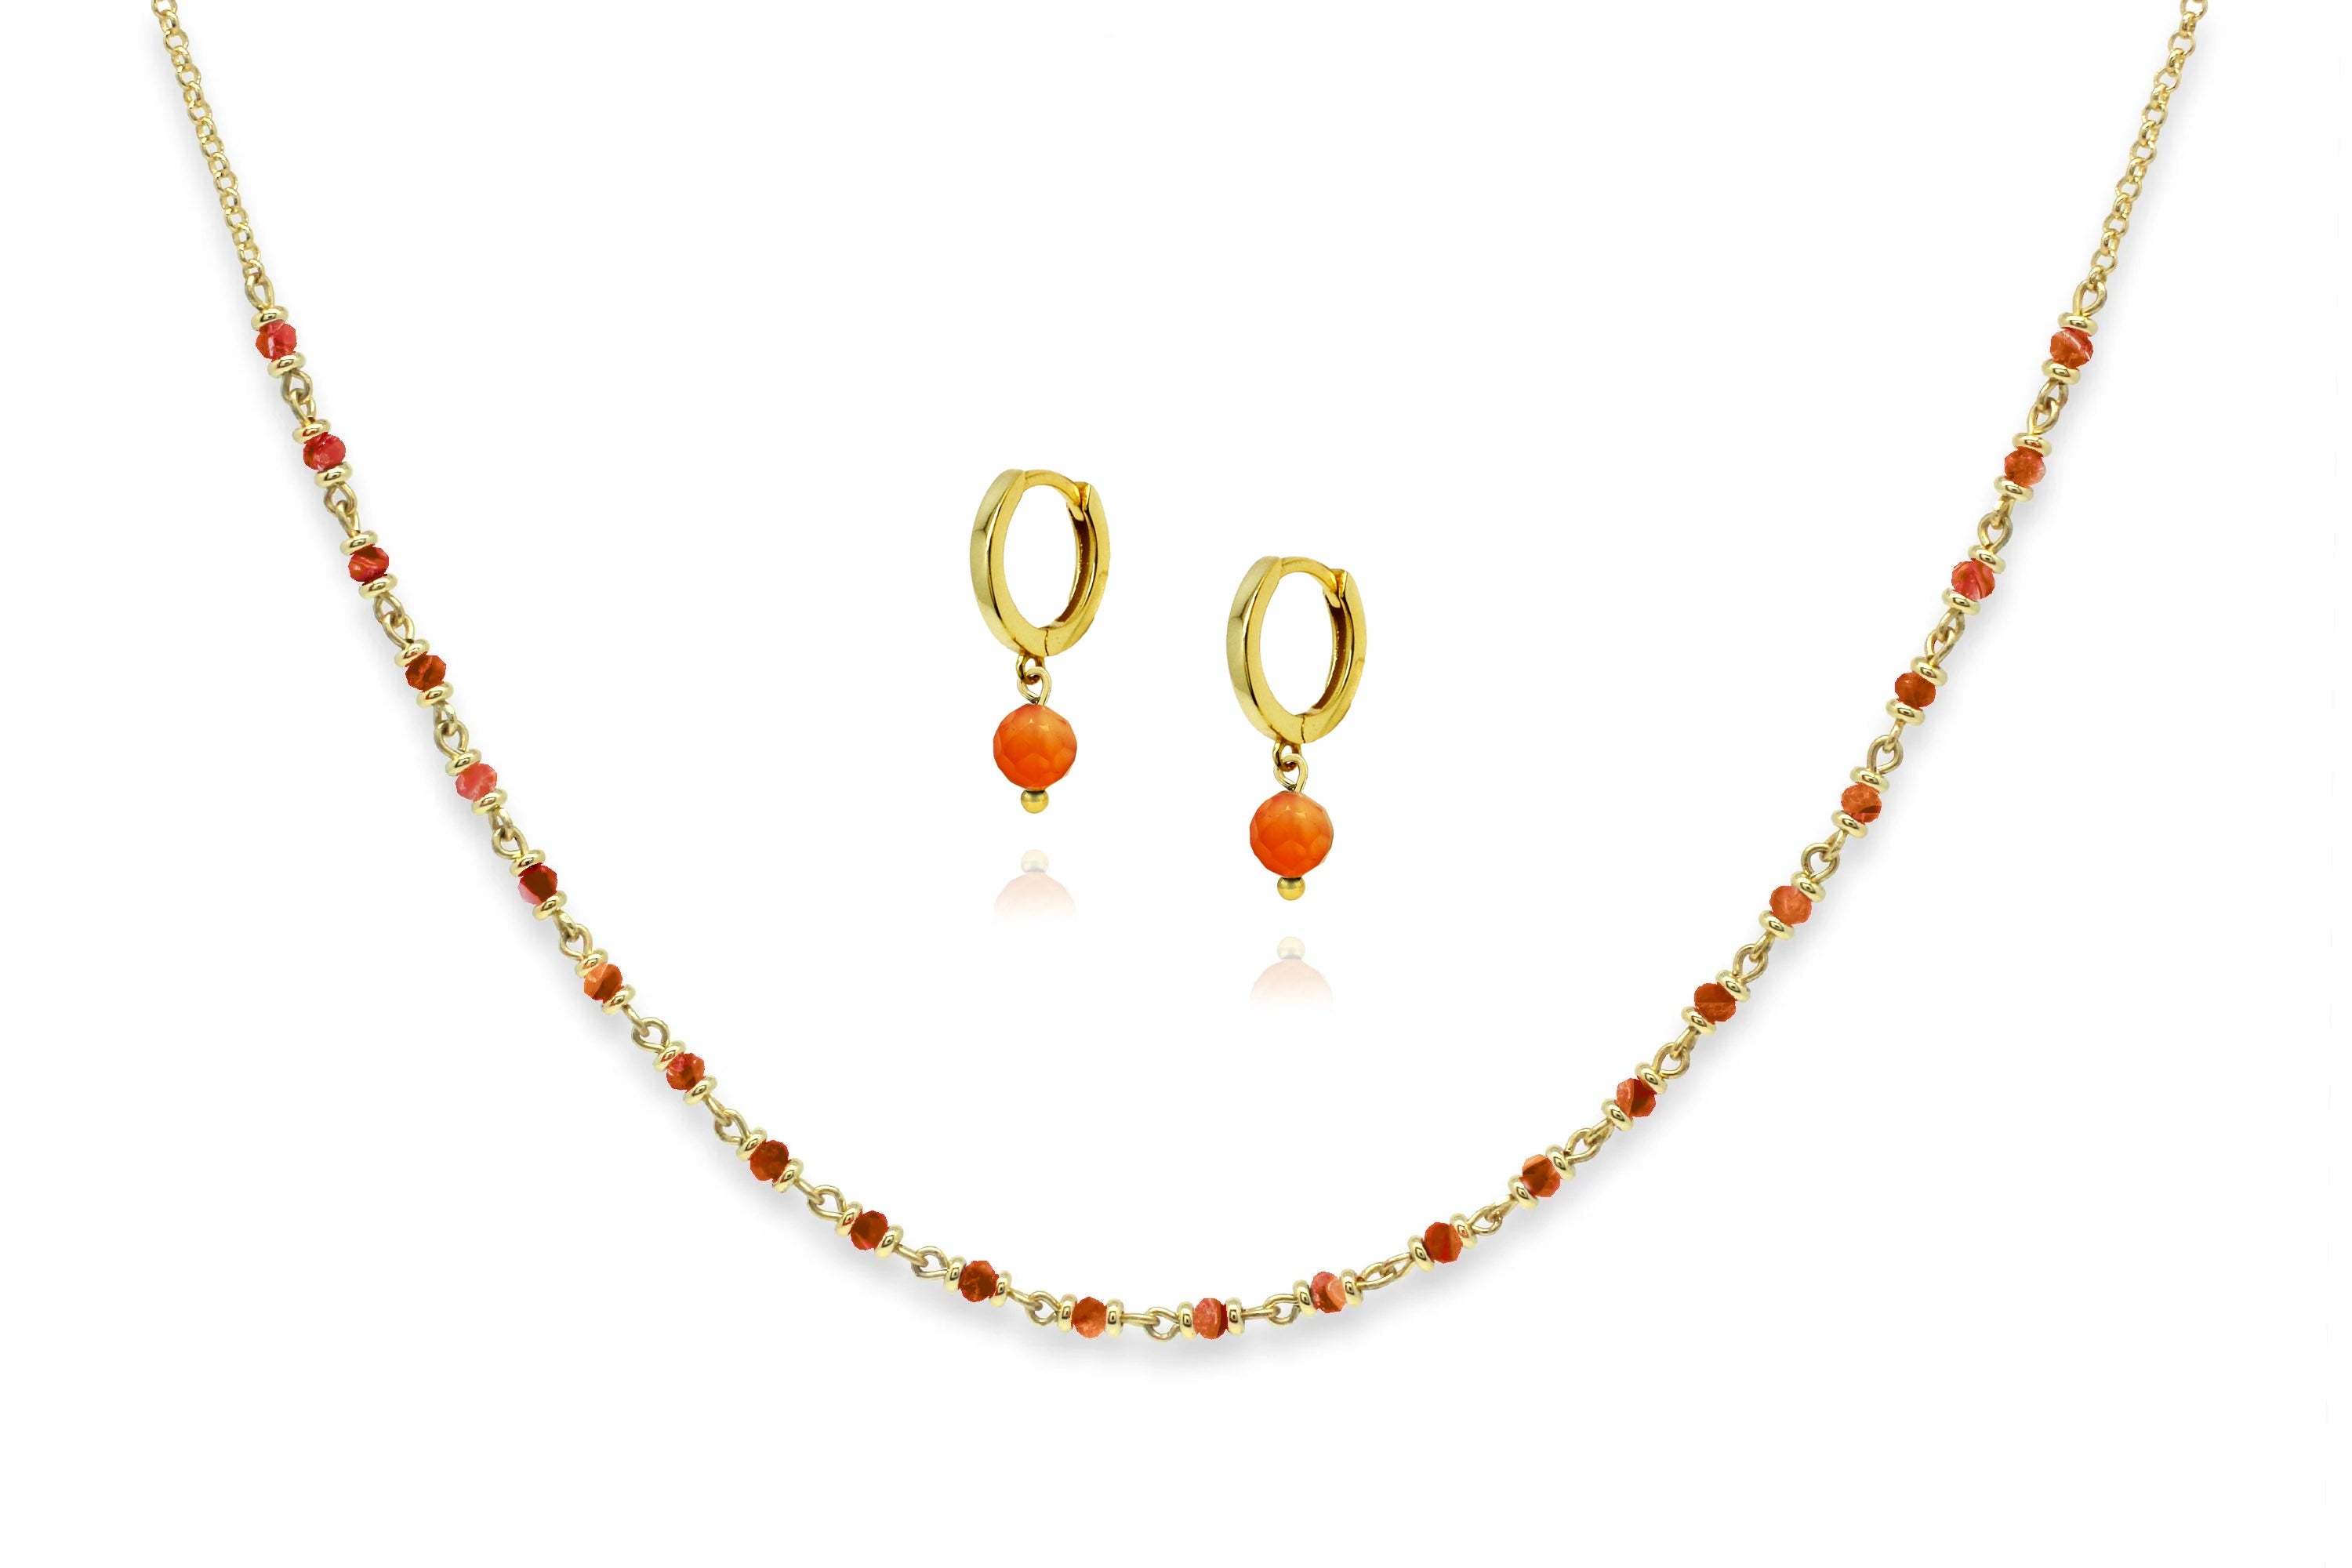 Panacea Gold Necklace & Earring Gift Set